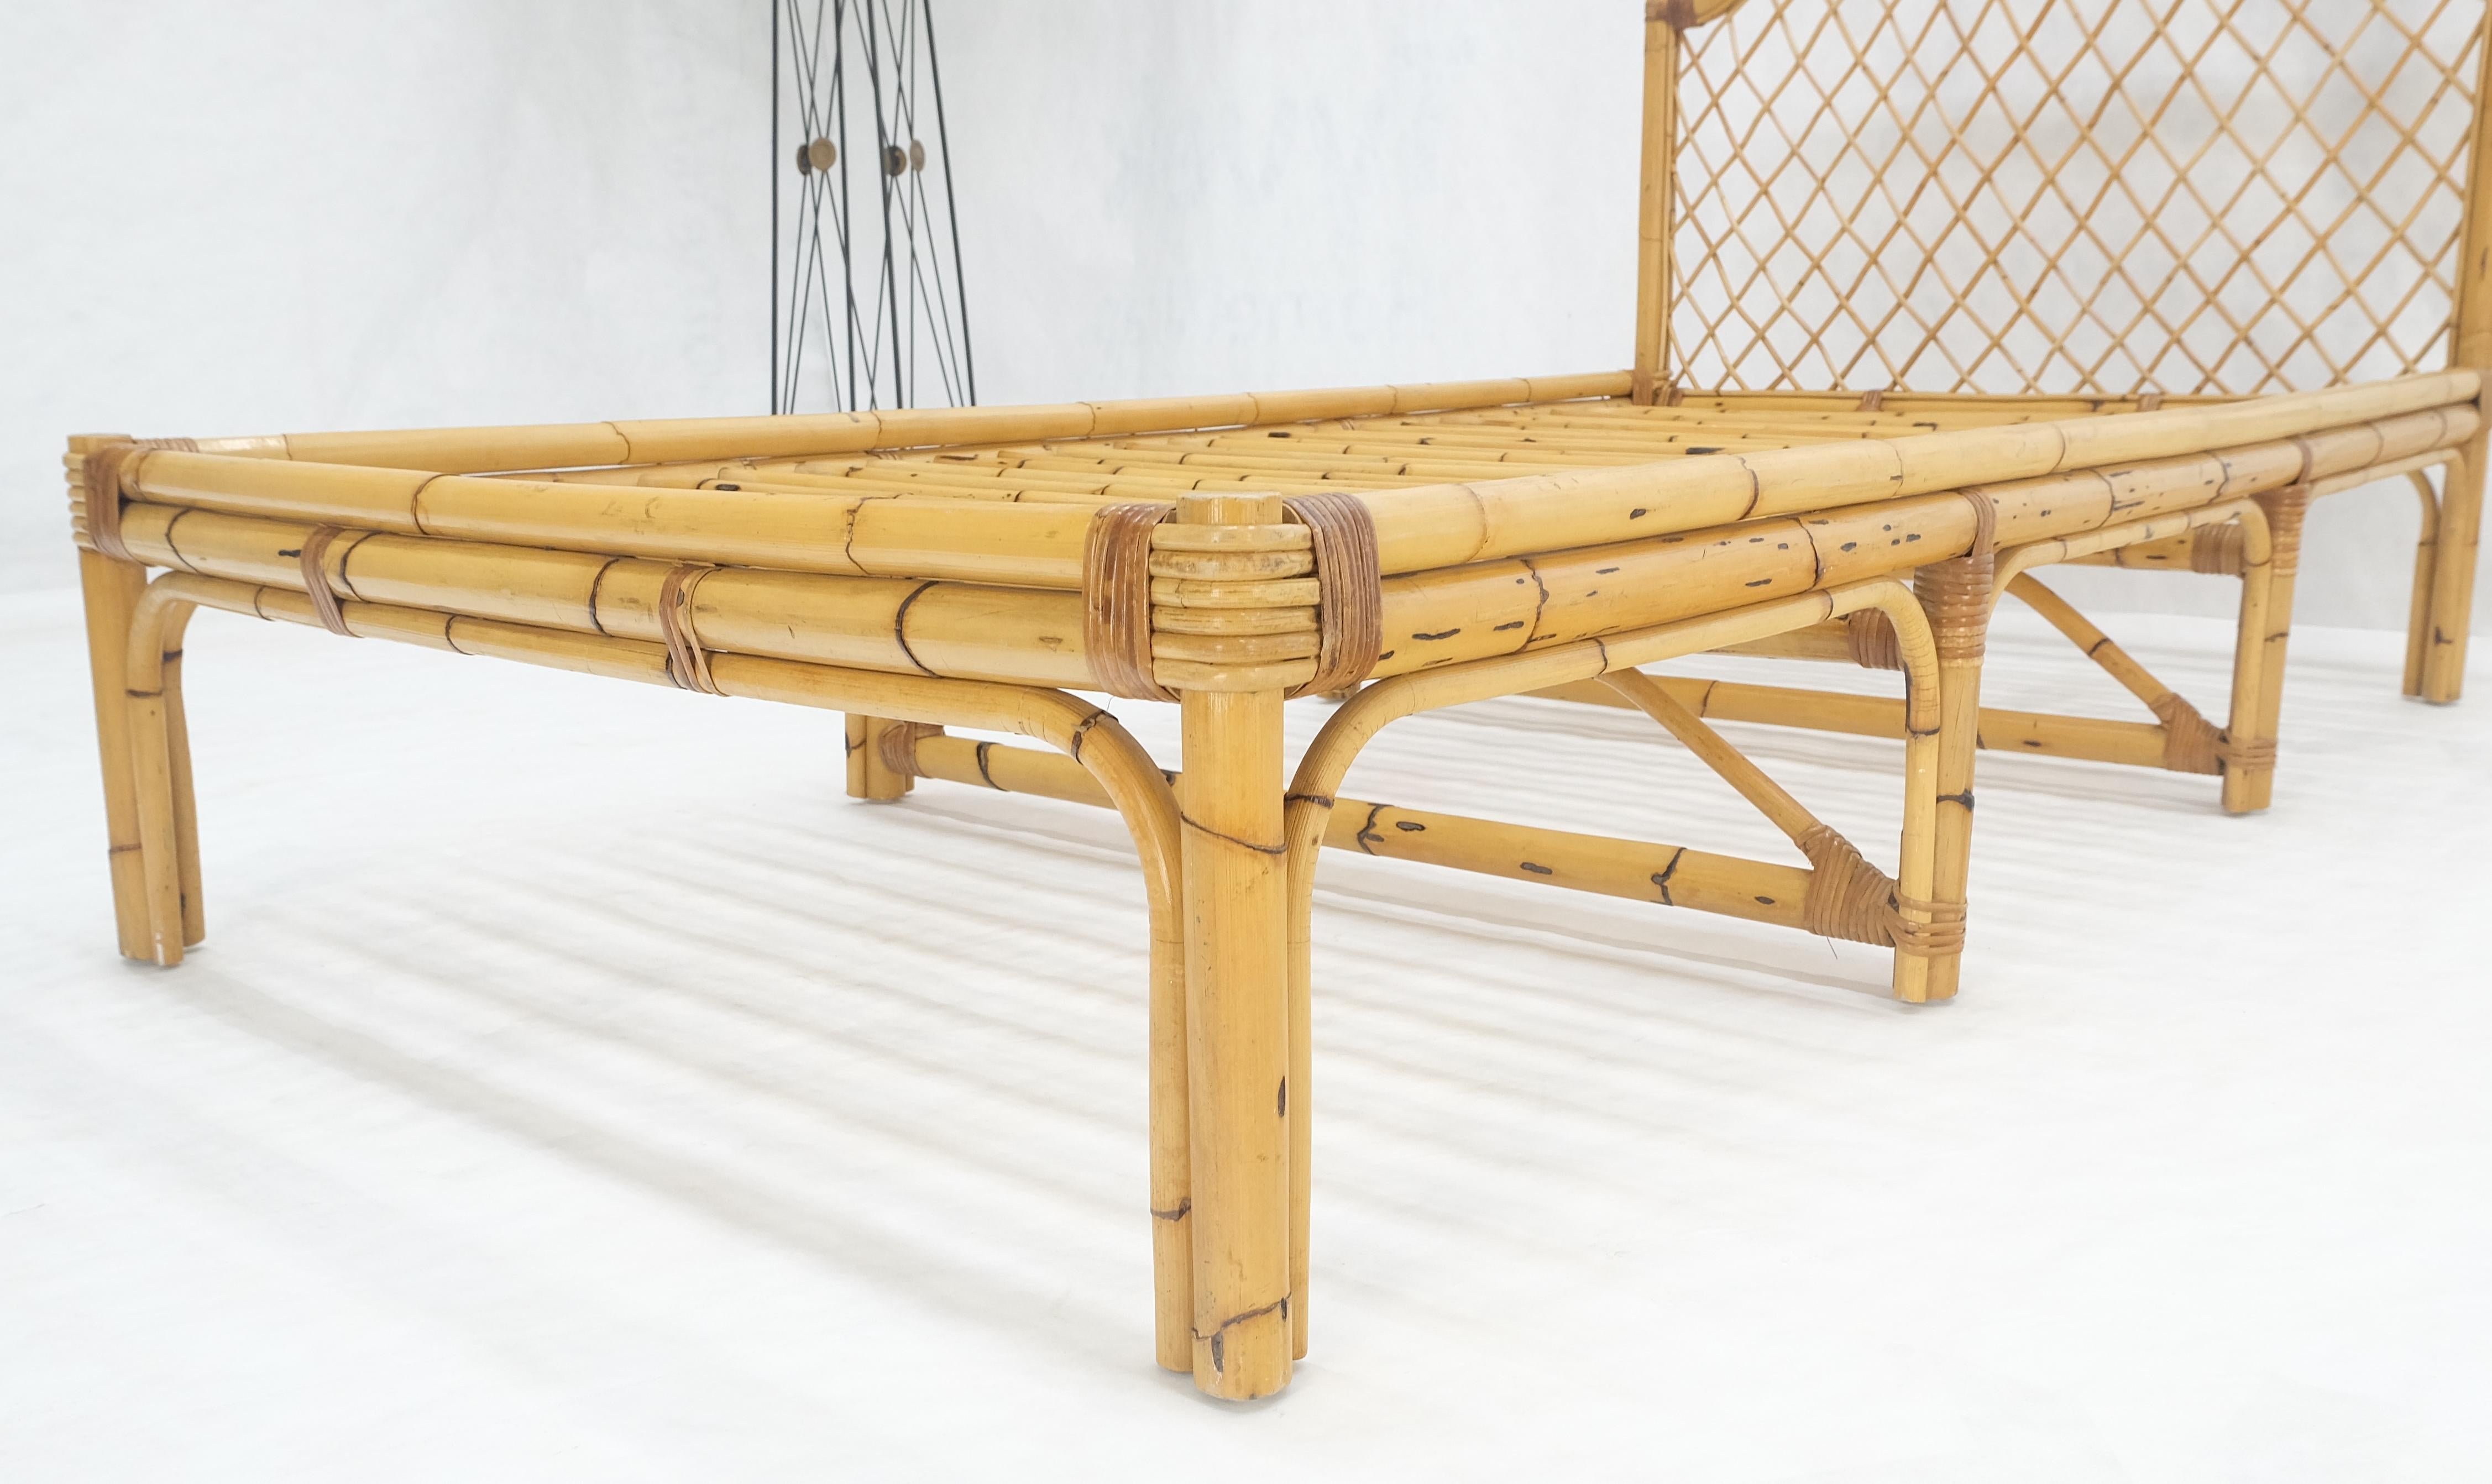 Vintage 1970s Large Bamboo Chaise Lounge Daybed Frame MINT! (Rattan) im Angebot